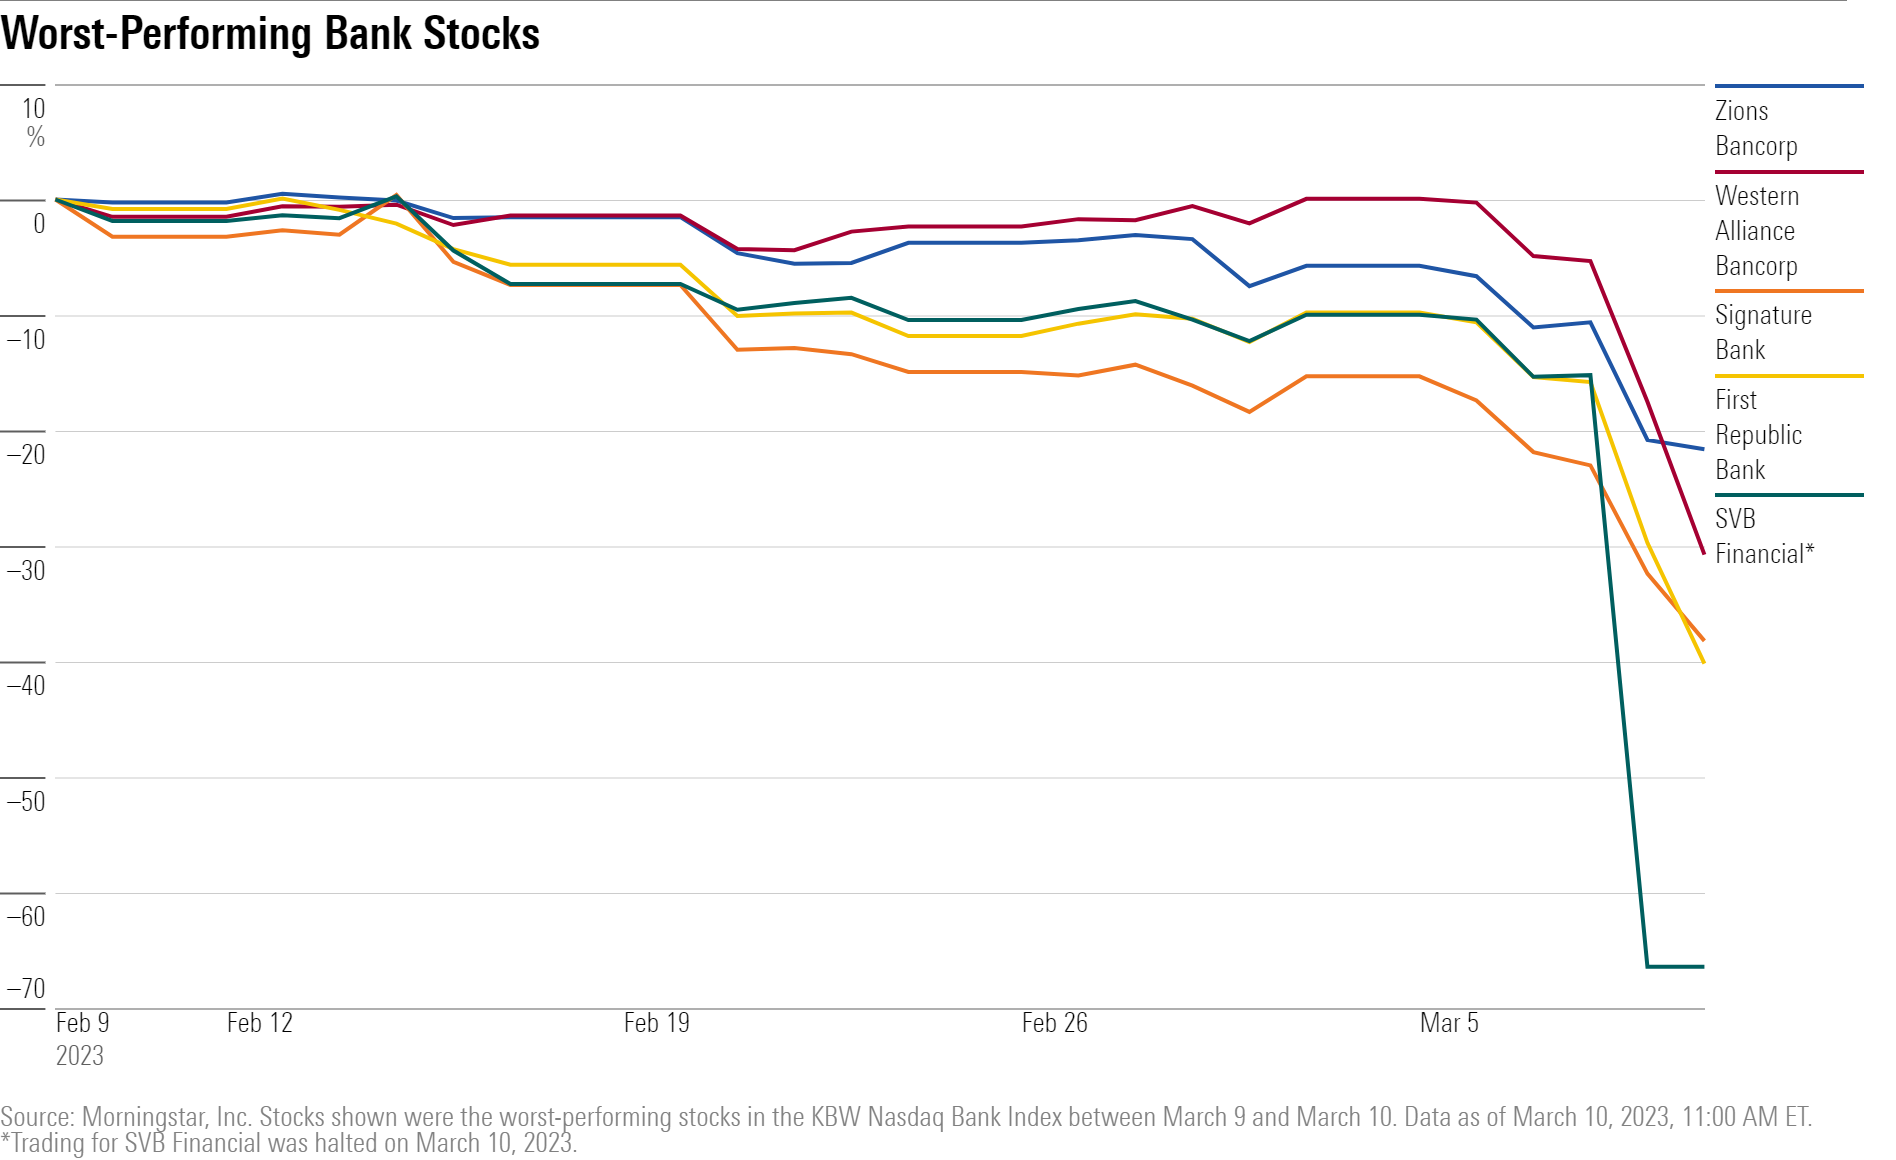 A line chart showing the performance of the ZION, WAL, SBNY, FRC, and SIVB stocks.